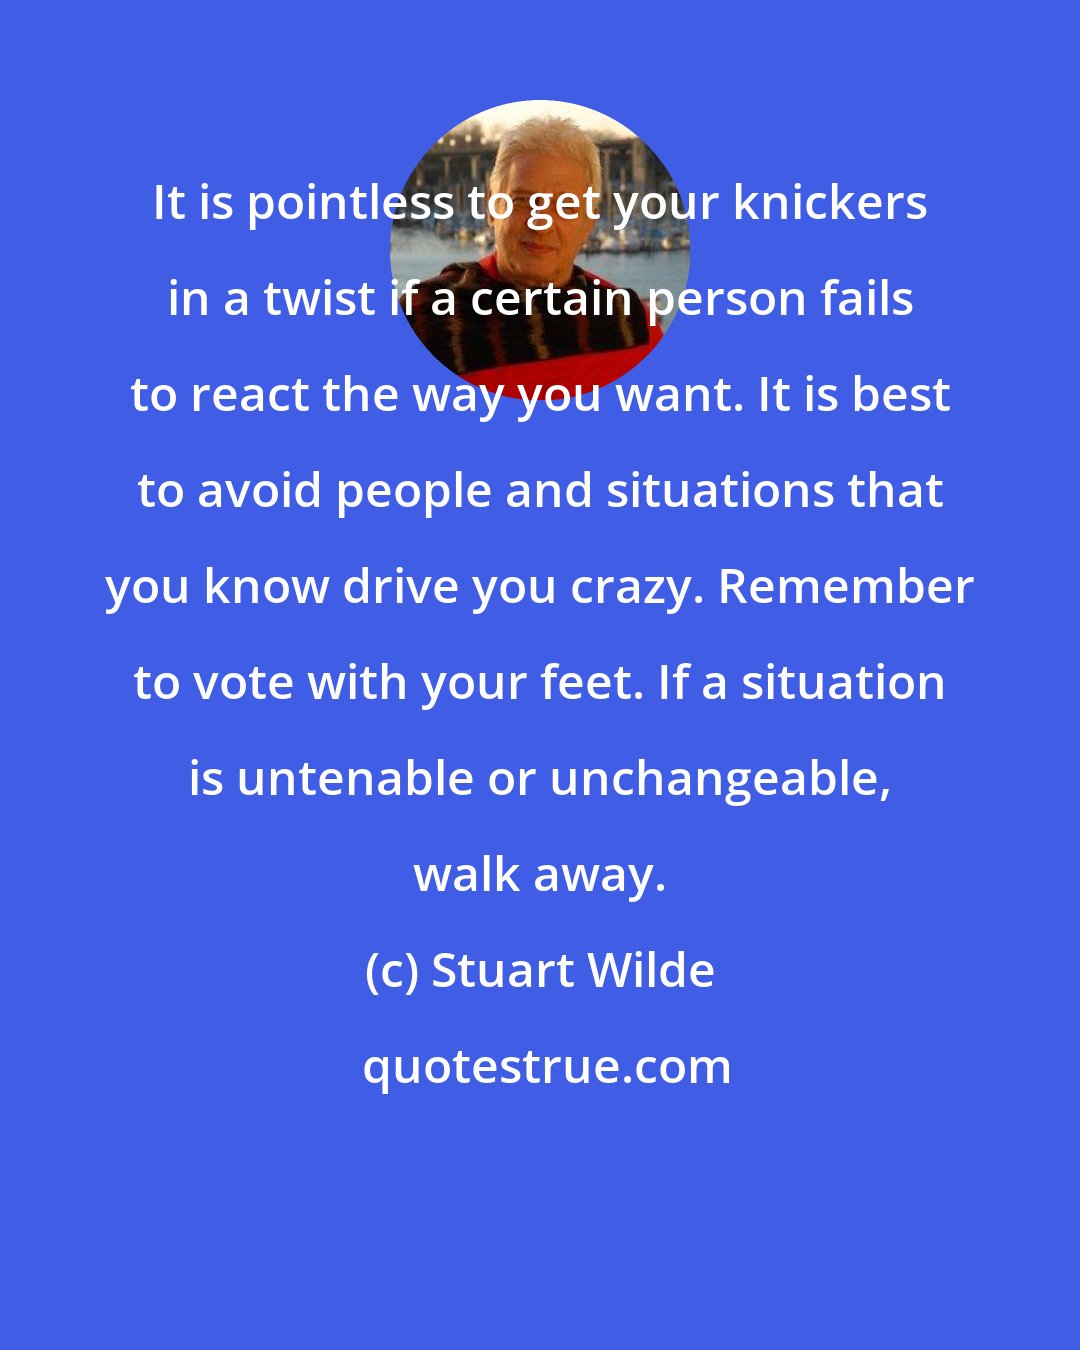 Stuart Wilde: It is pointless to get your knickers in a twist if a certain person fails to react the way you want. It is best to avoid people and situations that you know drive you crazy. Remember to vote with your feet. If a situation is untenable or unchangeable, walk away.